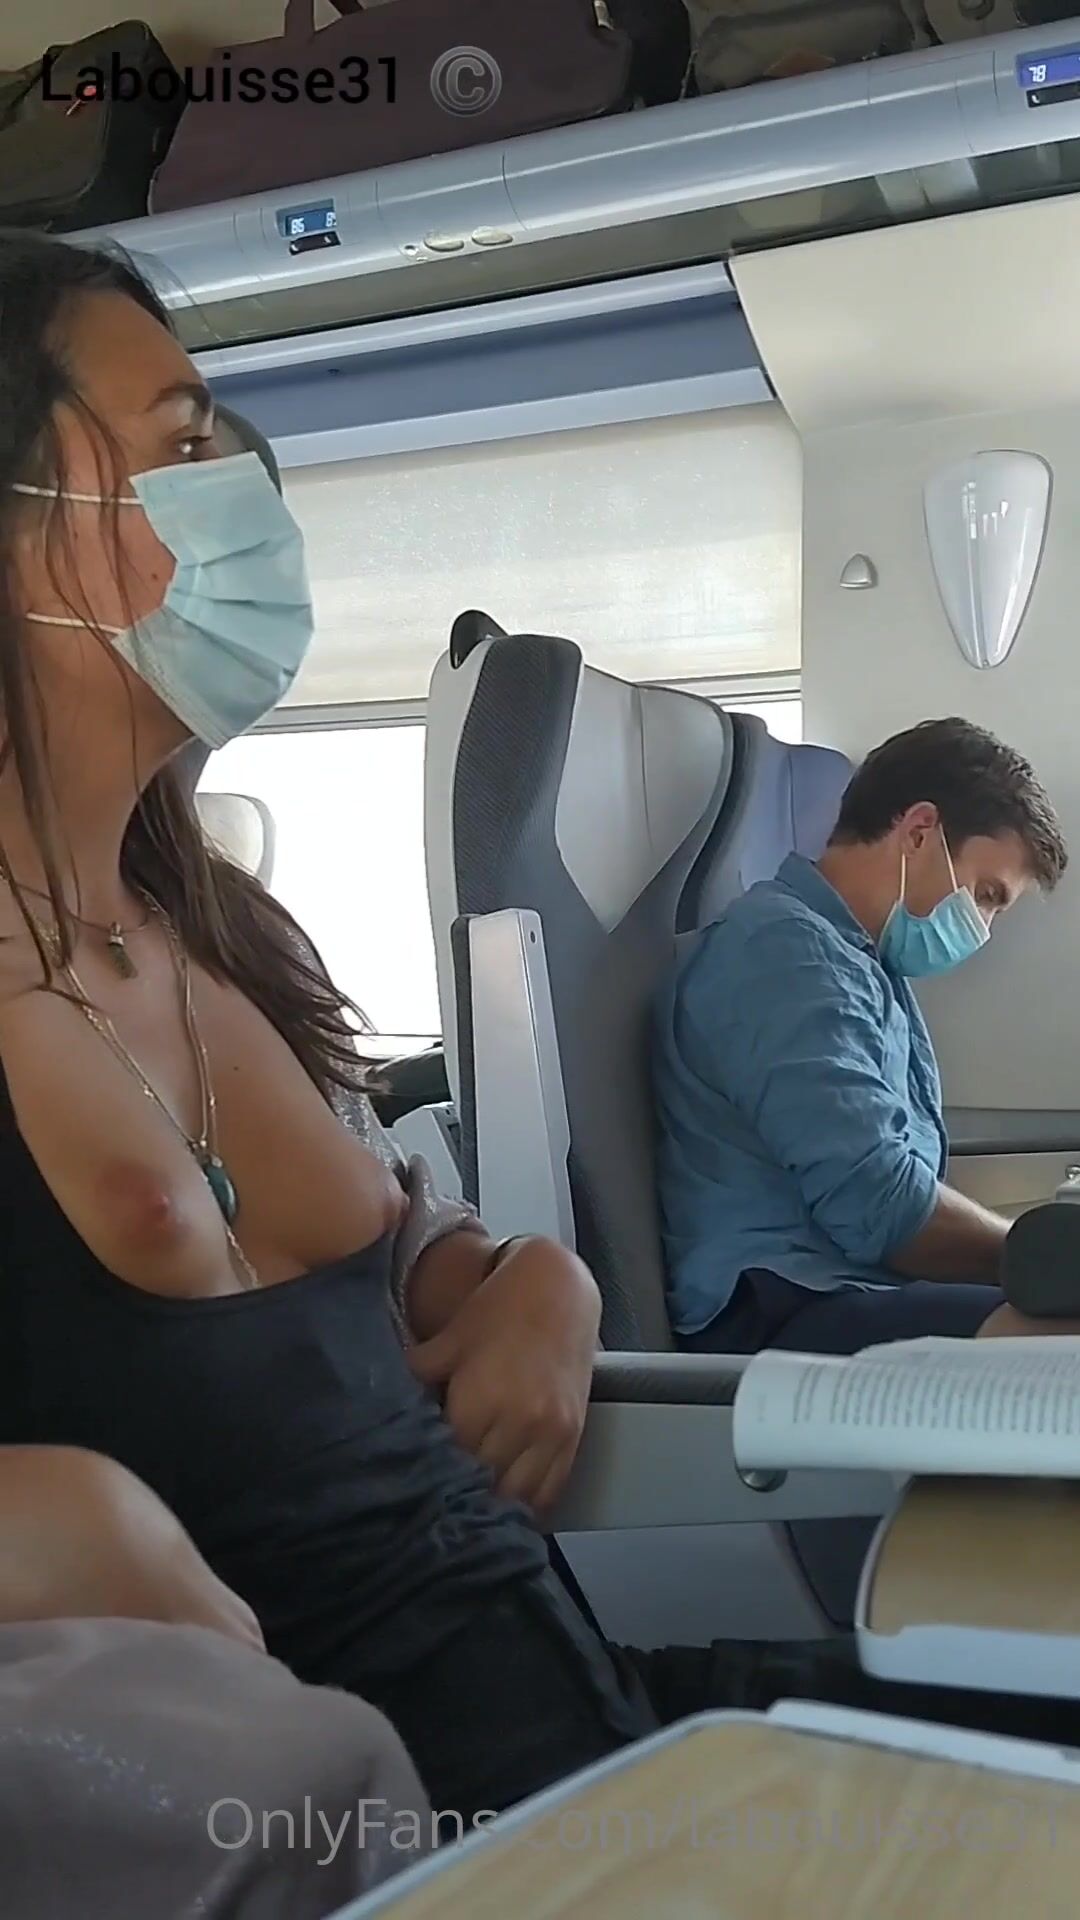 Labouisse naked on train in front of strangers